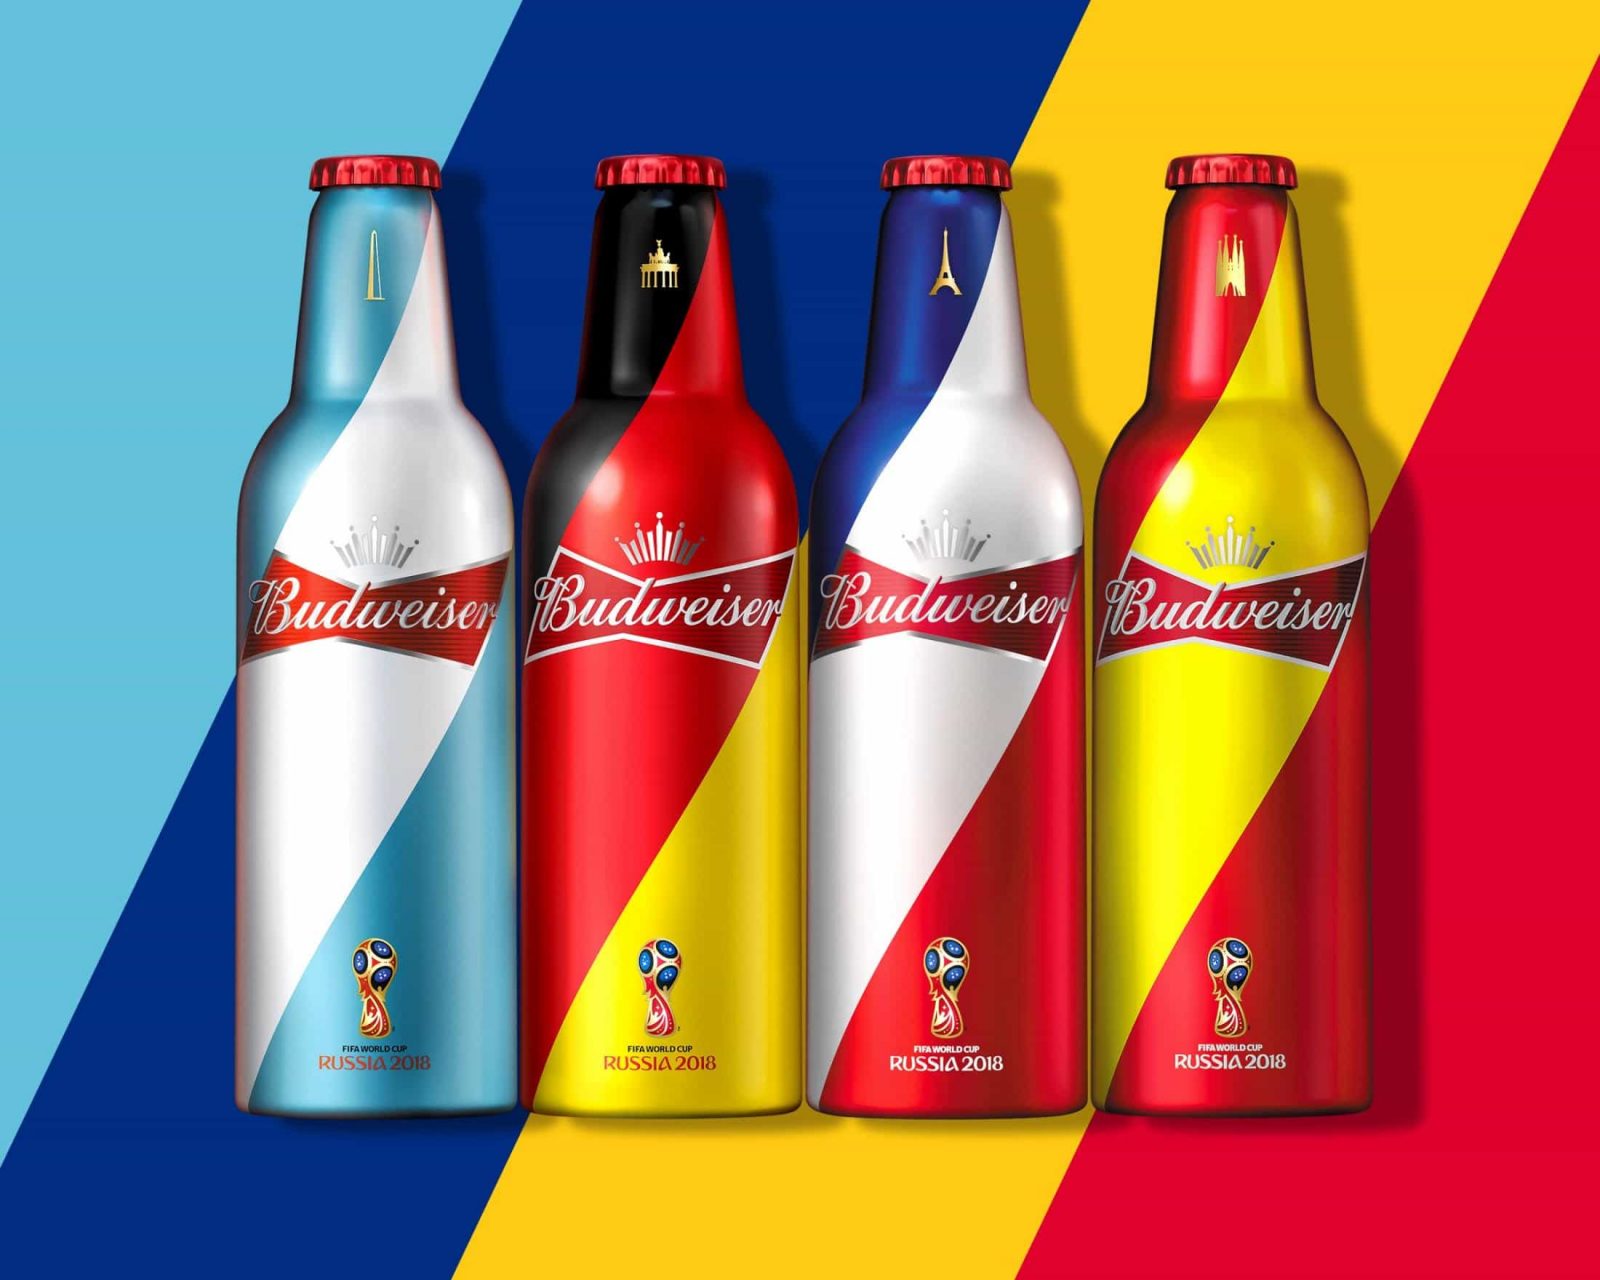 Budweiser limited edition bottles for FIFA World Cup 2018